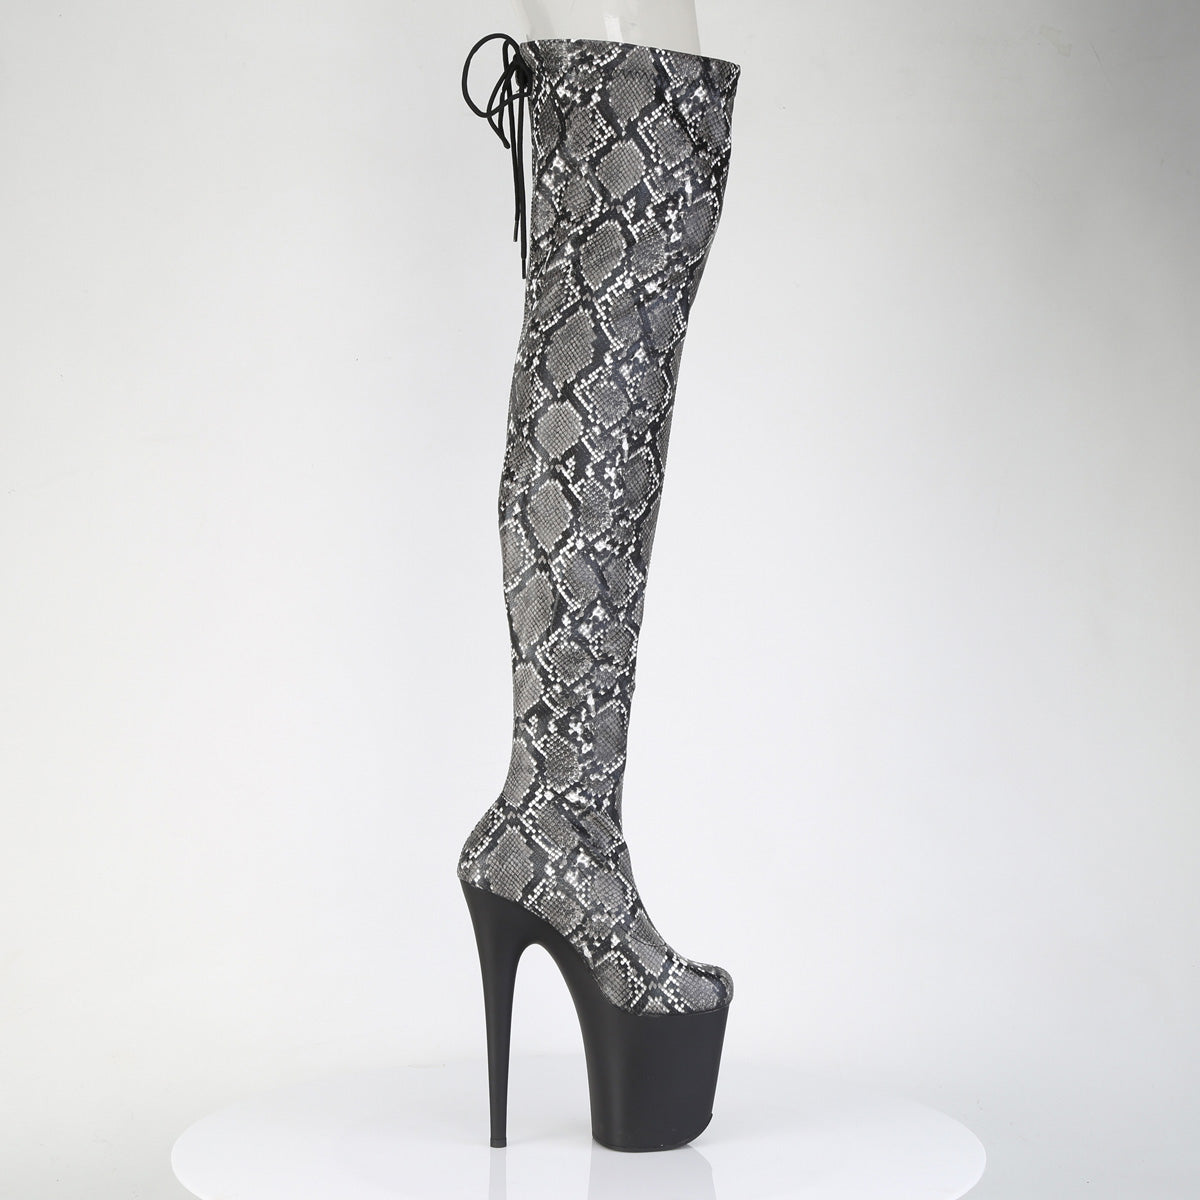 FLAMINGO-3008SP-BT Stretch Snake Print Pull-On Thigh Boot Black & Grey Multi view 2